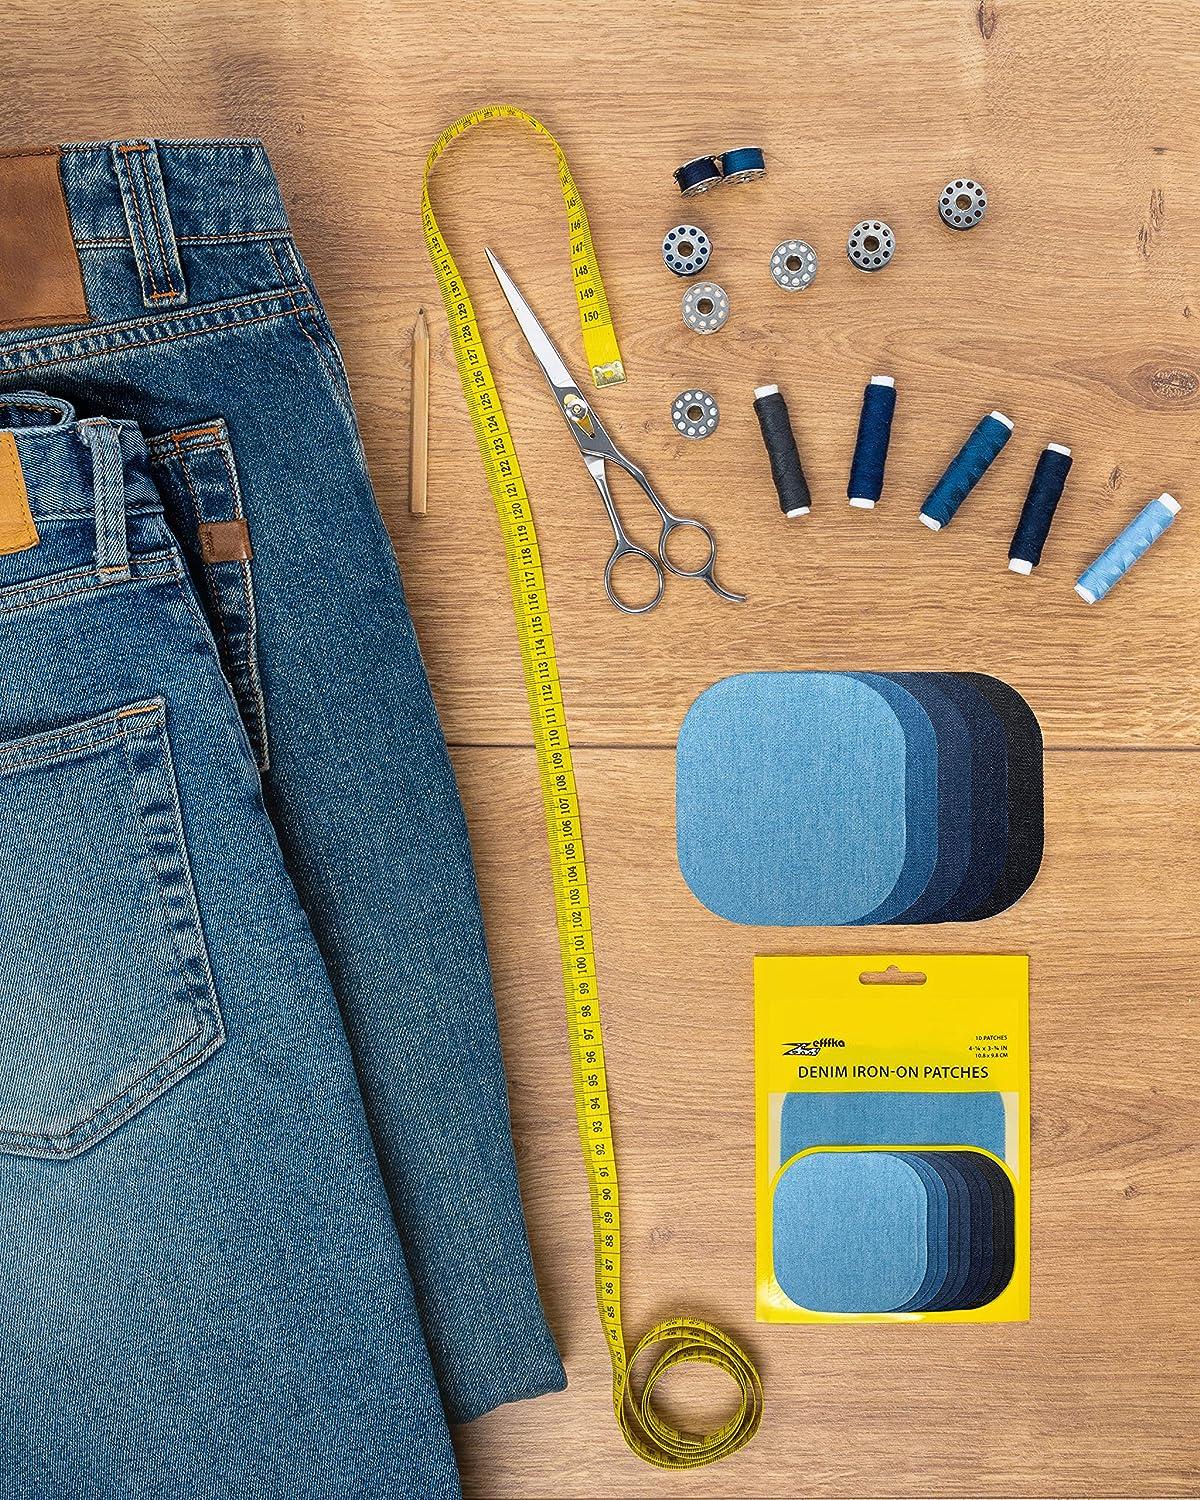 1pc Fabric Denim Suede Iron-on Patches No Sewing On Patches Strongest Glue  For Repair Clothing Shirts Jeans Elbow Knee DIY Decor - AliExpress